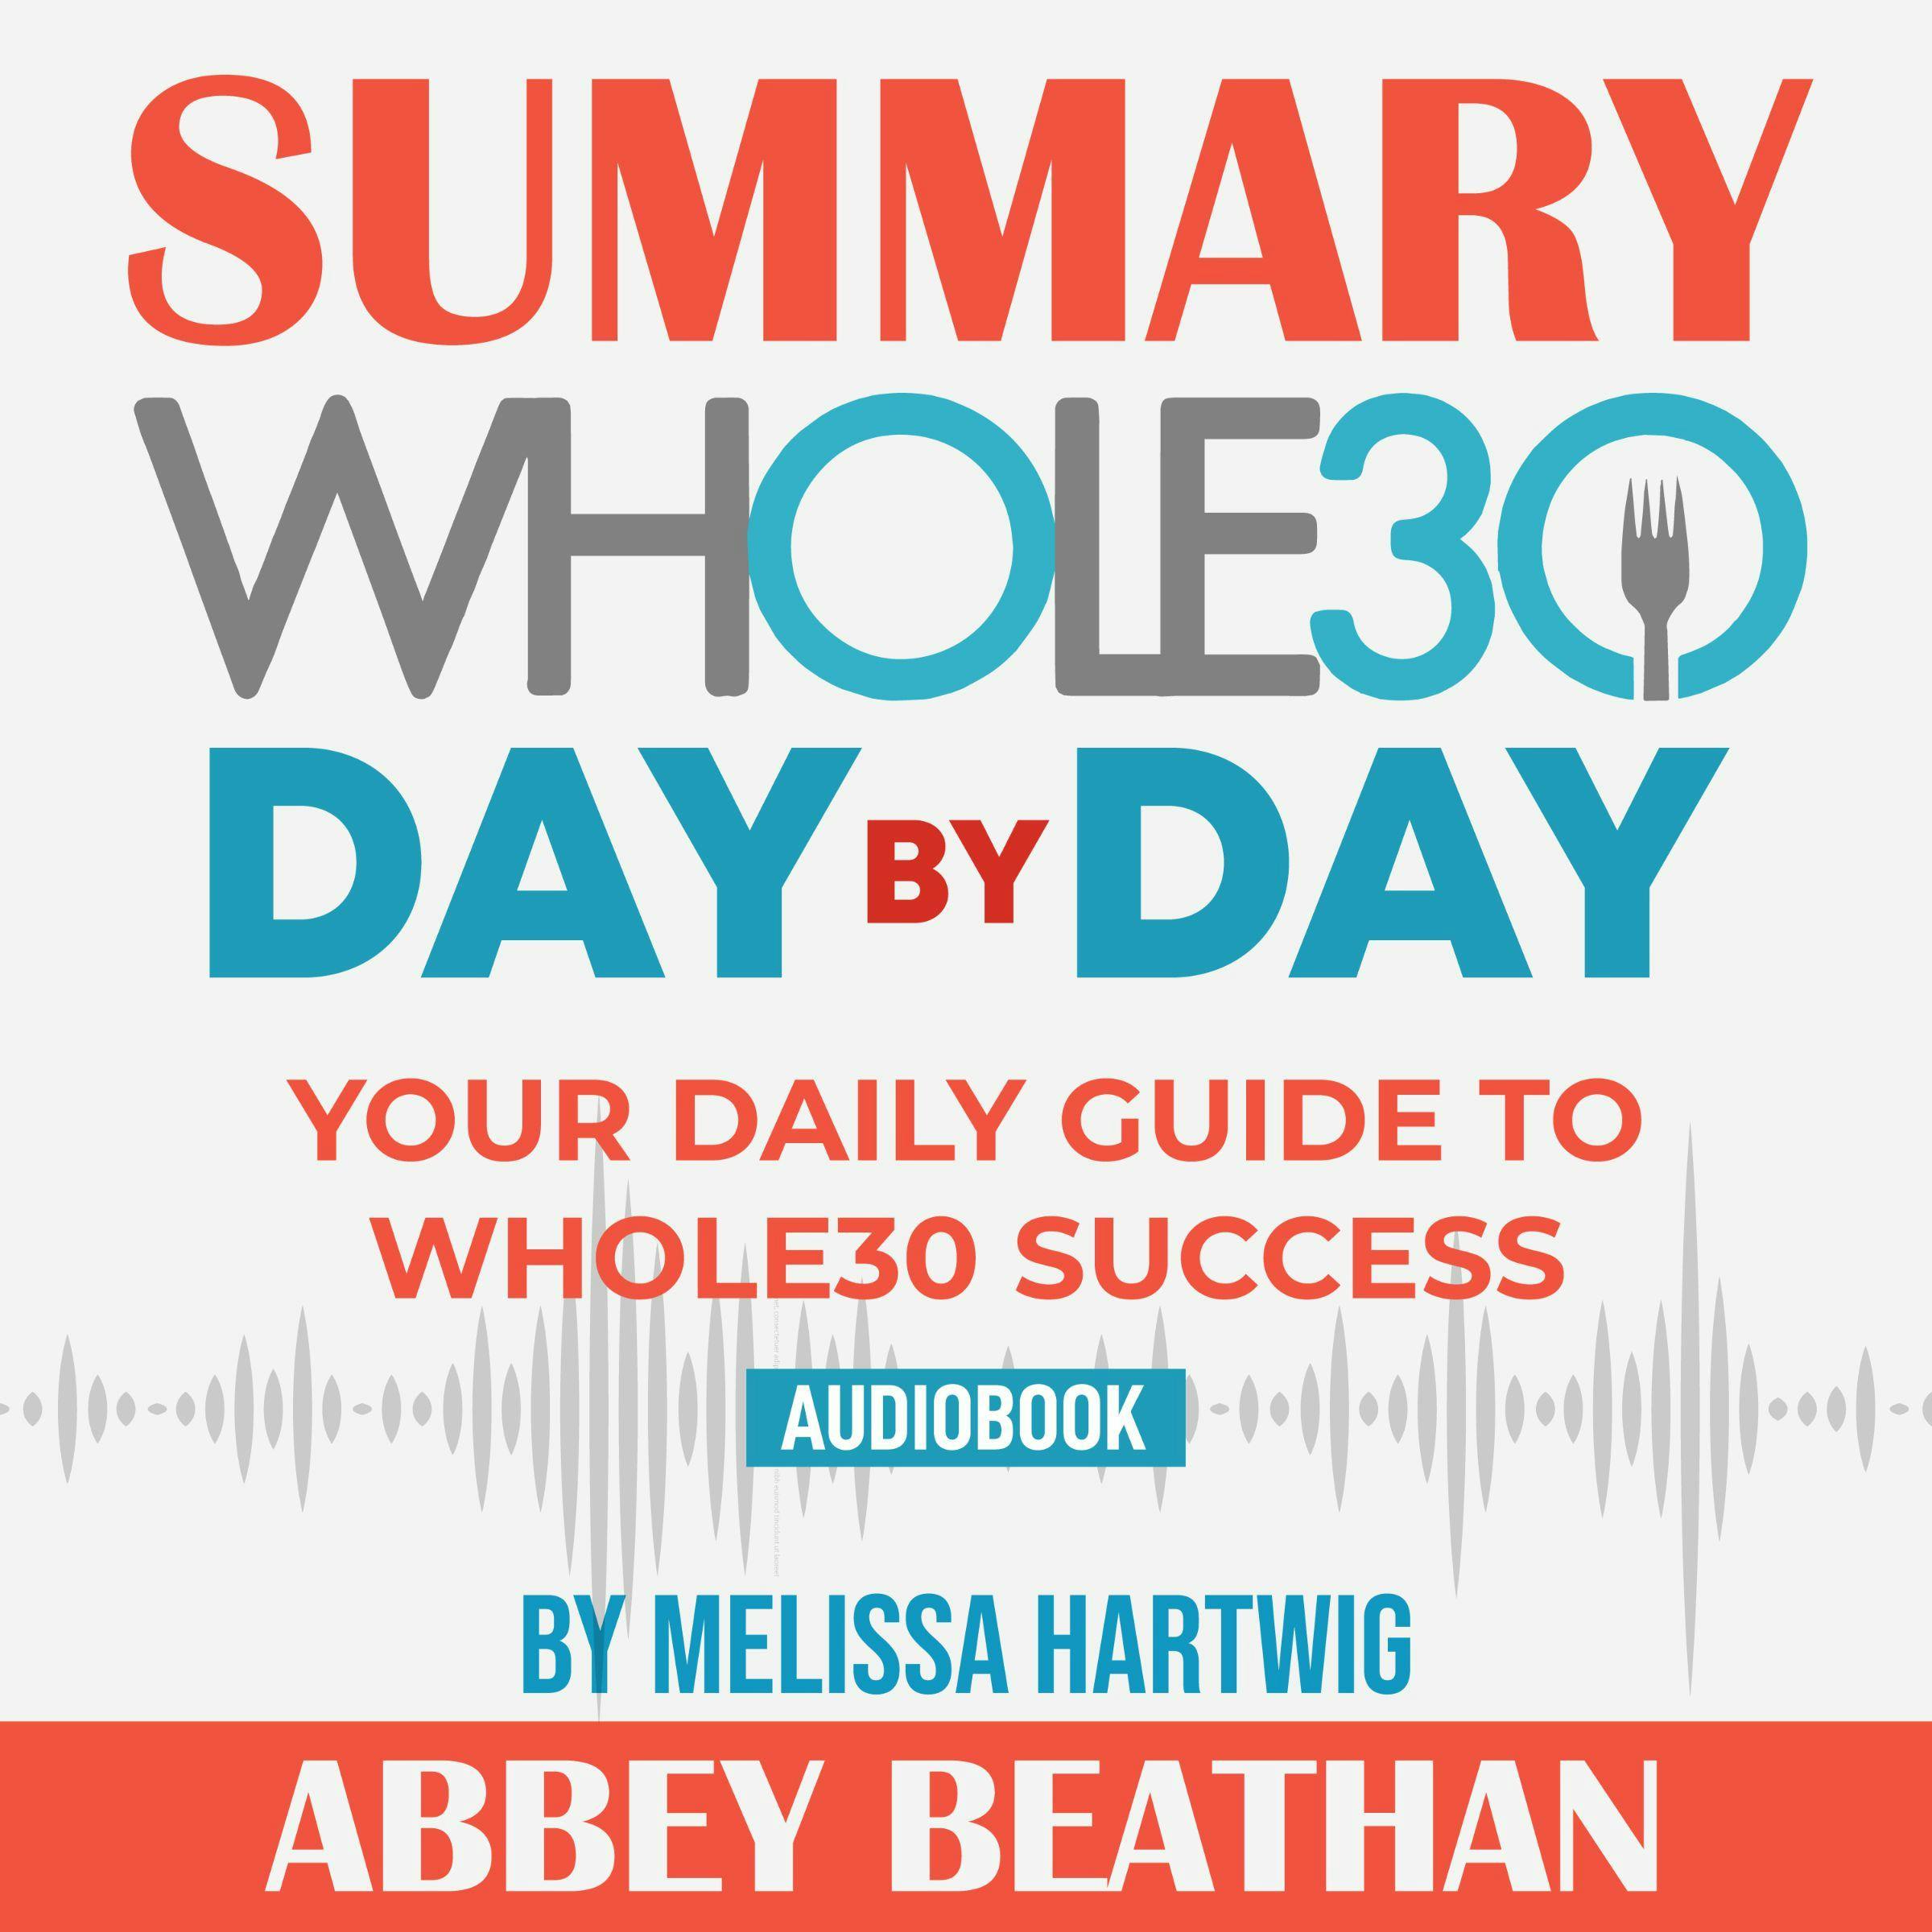 Summary of The Whole30 Day by Day: Your Daily Guide to Whole30 Success by Melissa Hartwig - Abbey Beathan Publishing